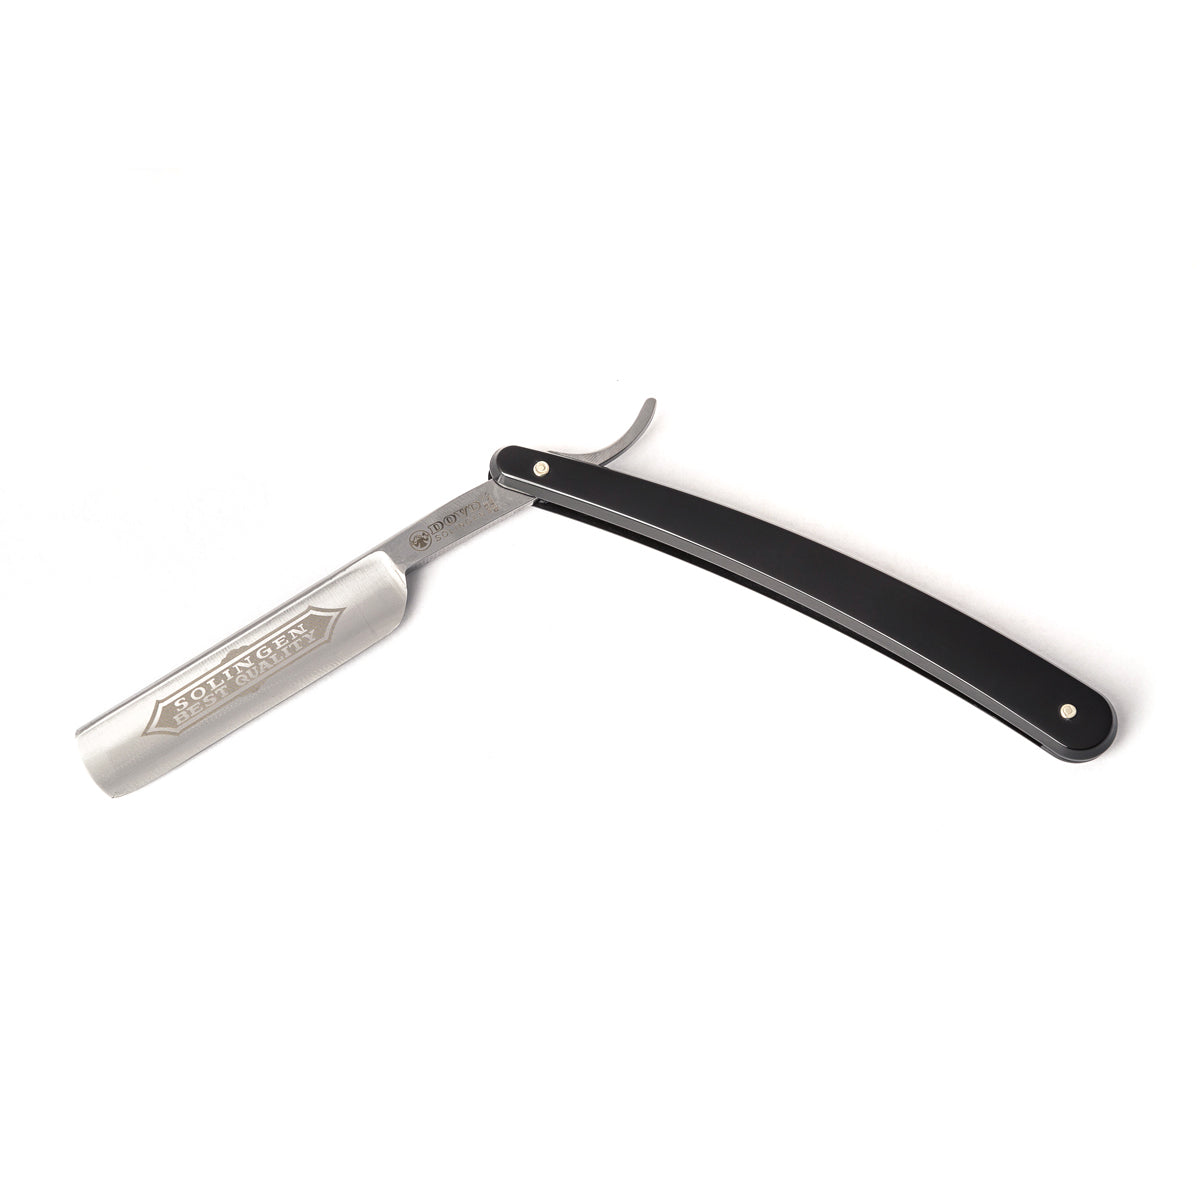 Black Straight Razor Manufactured by Dovo in Solingen, Germany